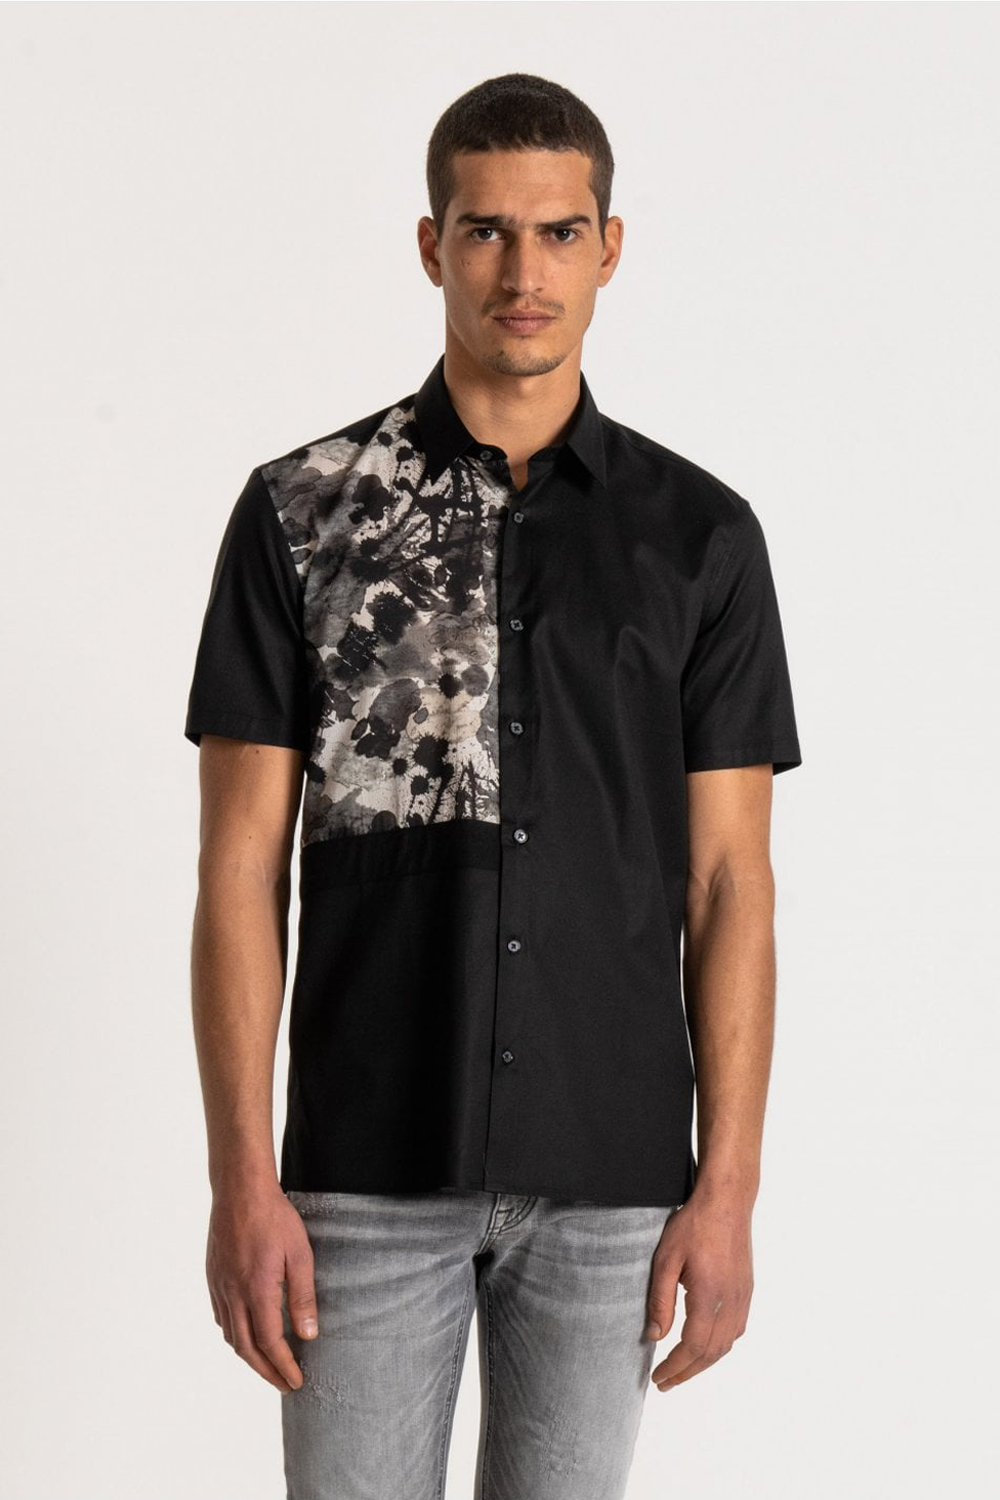 Buy the Antony Morato Front Patch S/S Shirt Black at Intro. Spend £50 for free UK delivery. Official stockists. We ship worldwide.